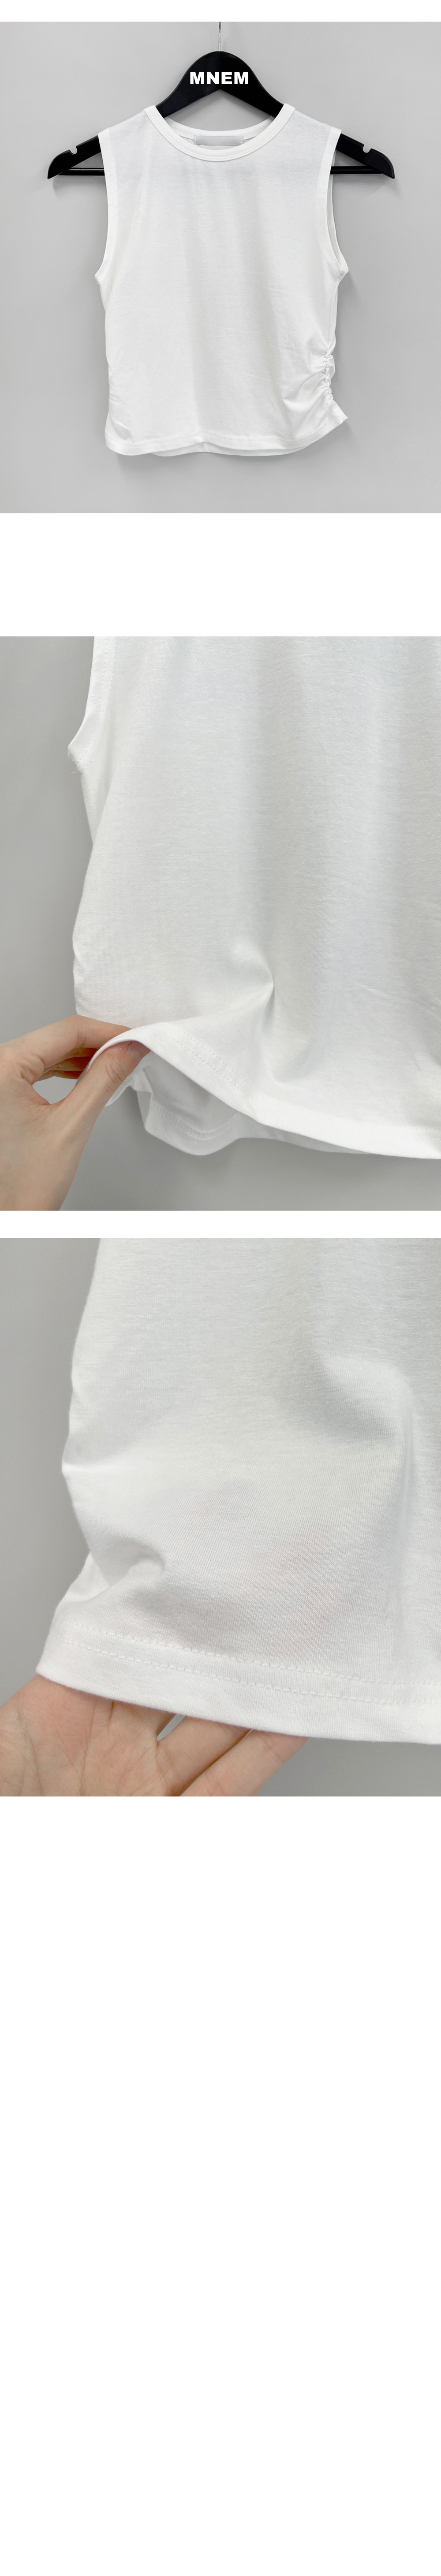 long sleeved tee detail image-S1L12